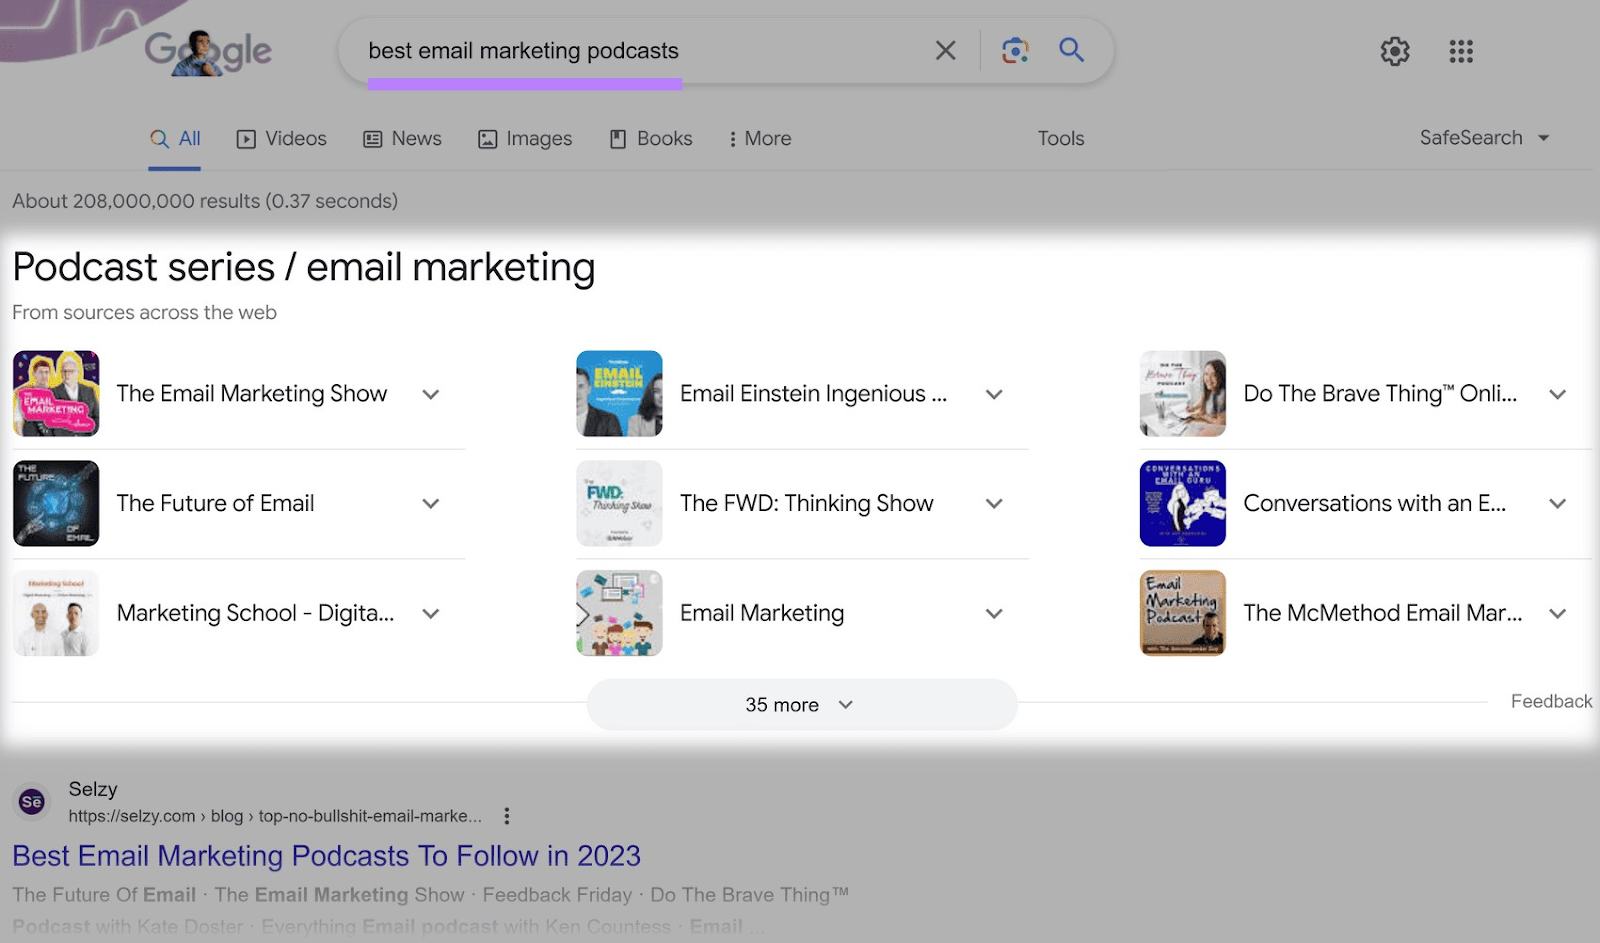 Google results for “best email marketing podcasts" query